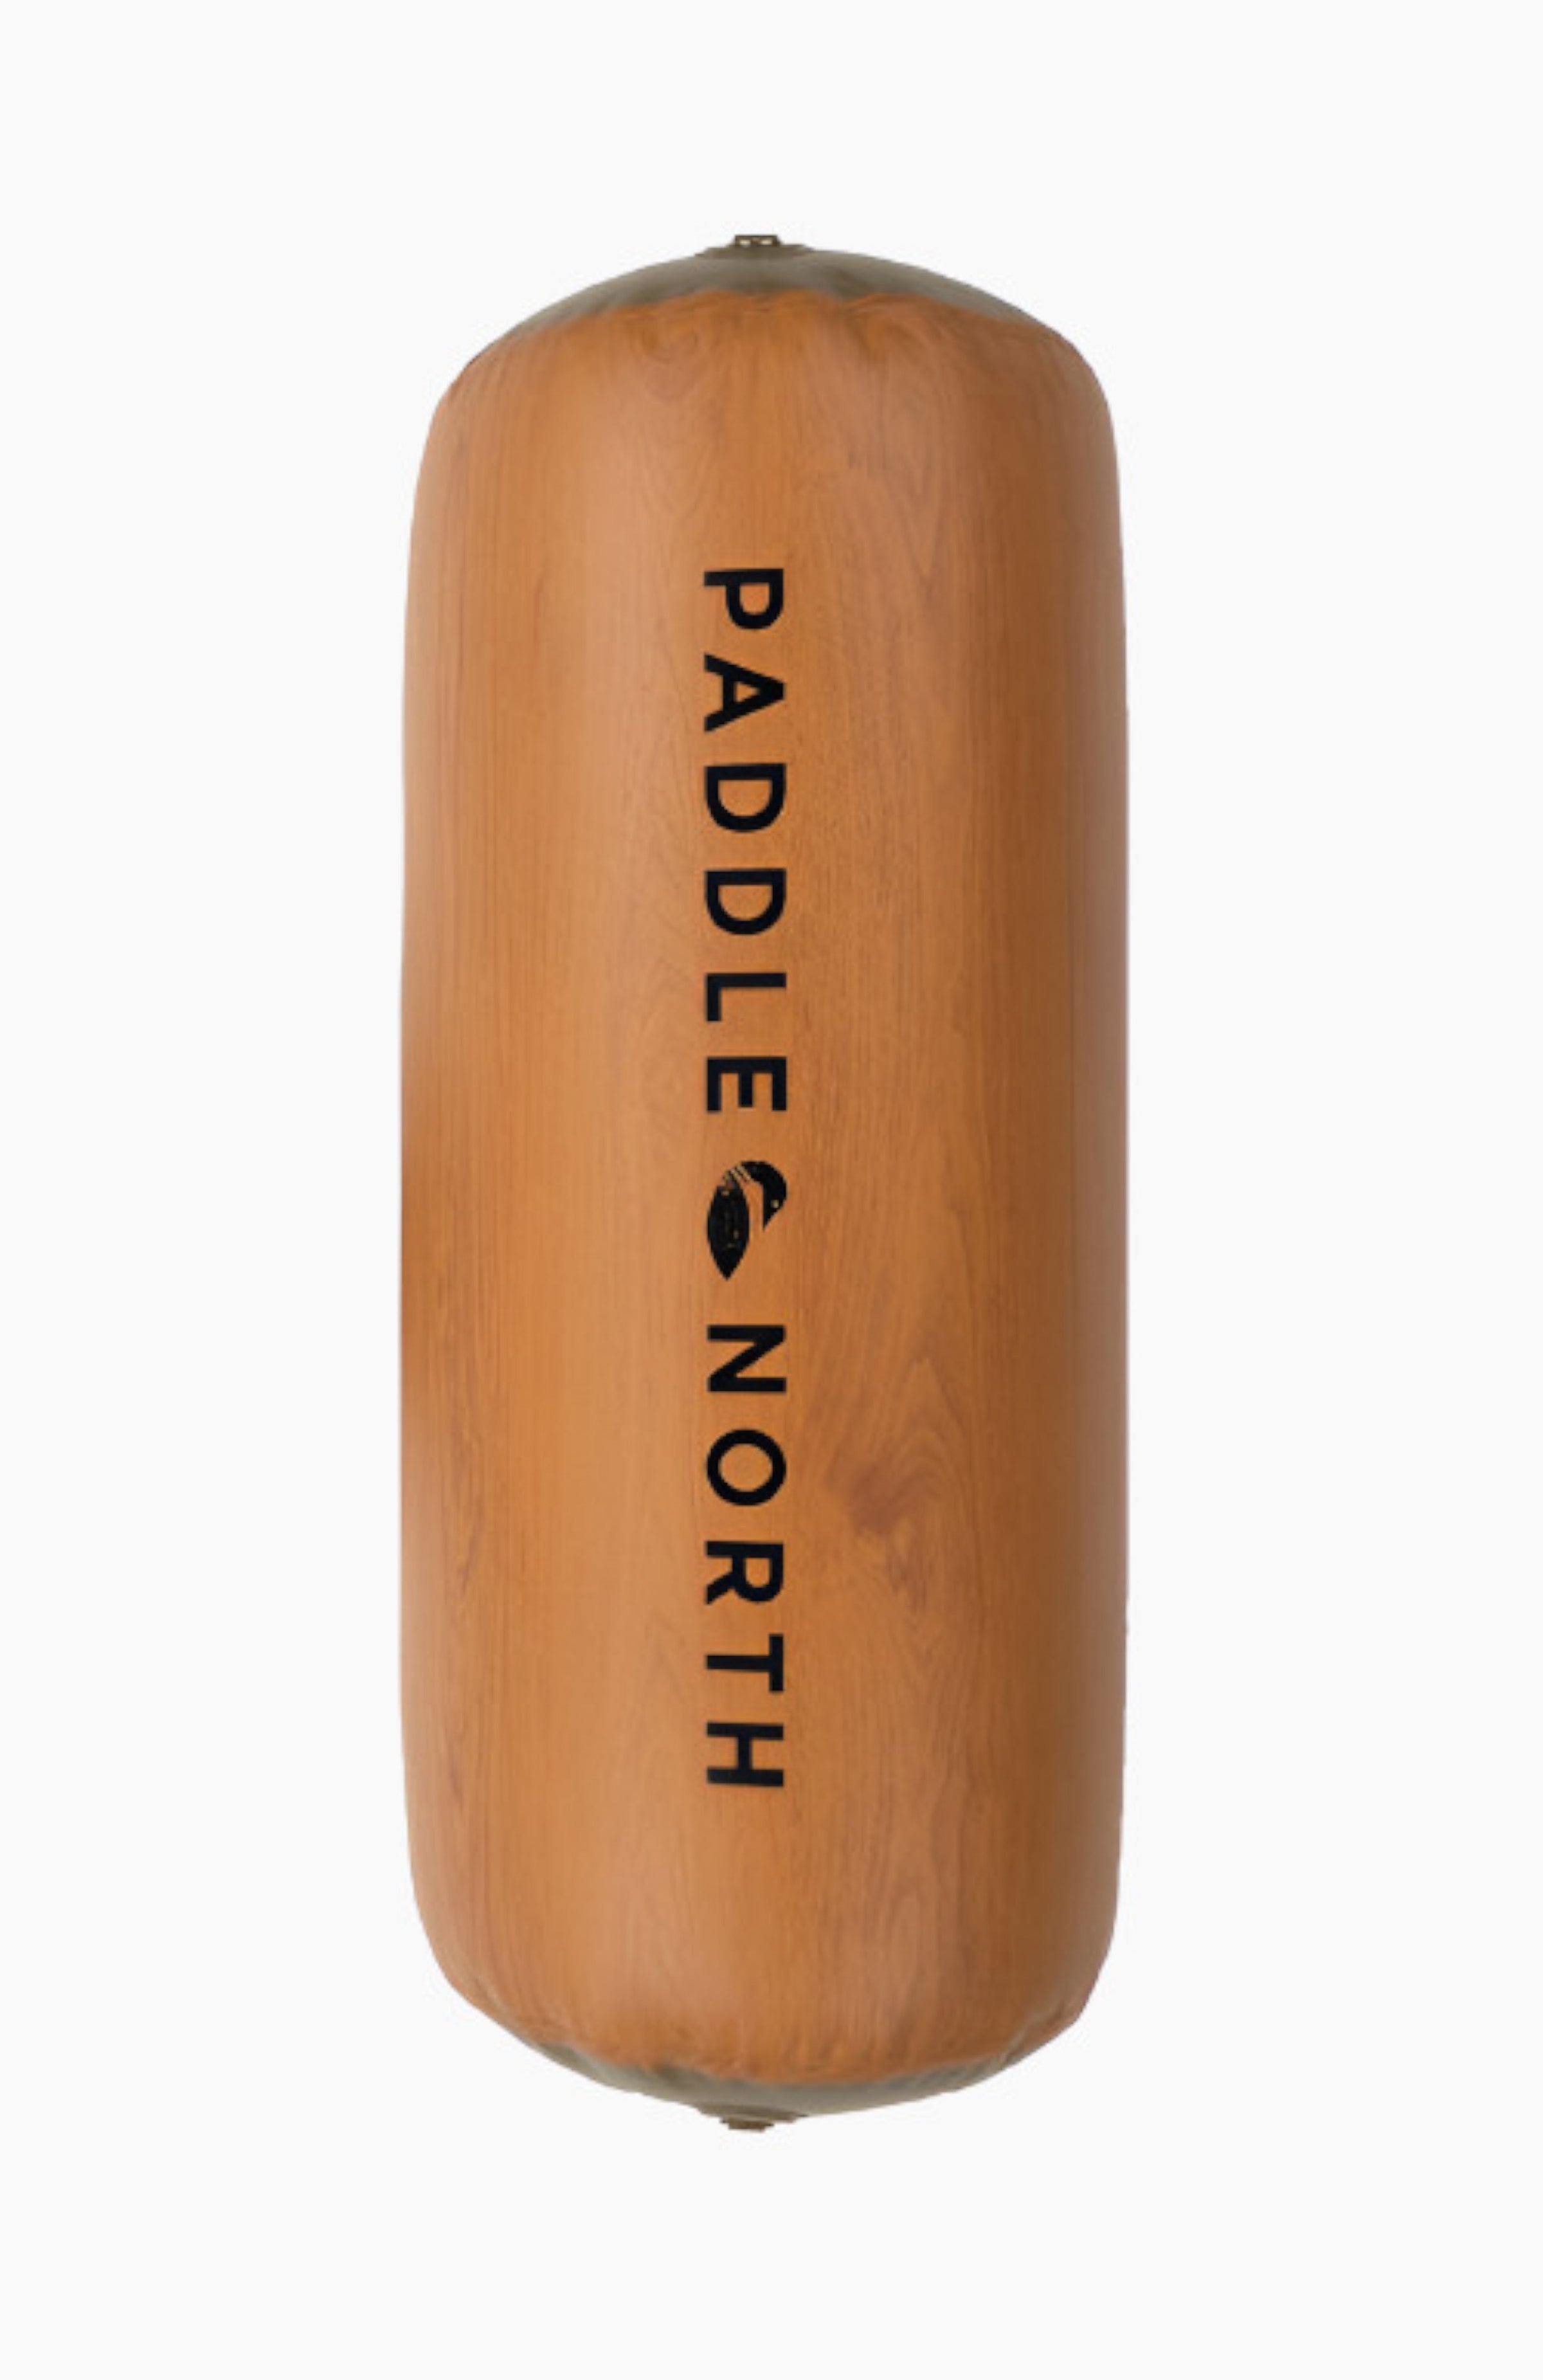 Dock accessories: Brown inflatable log with paddle north logo on it.